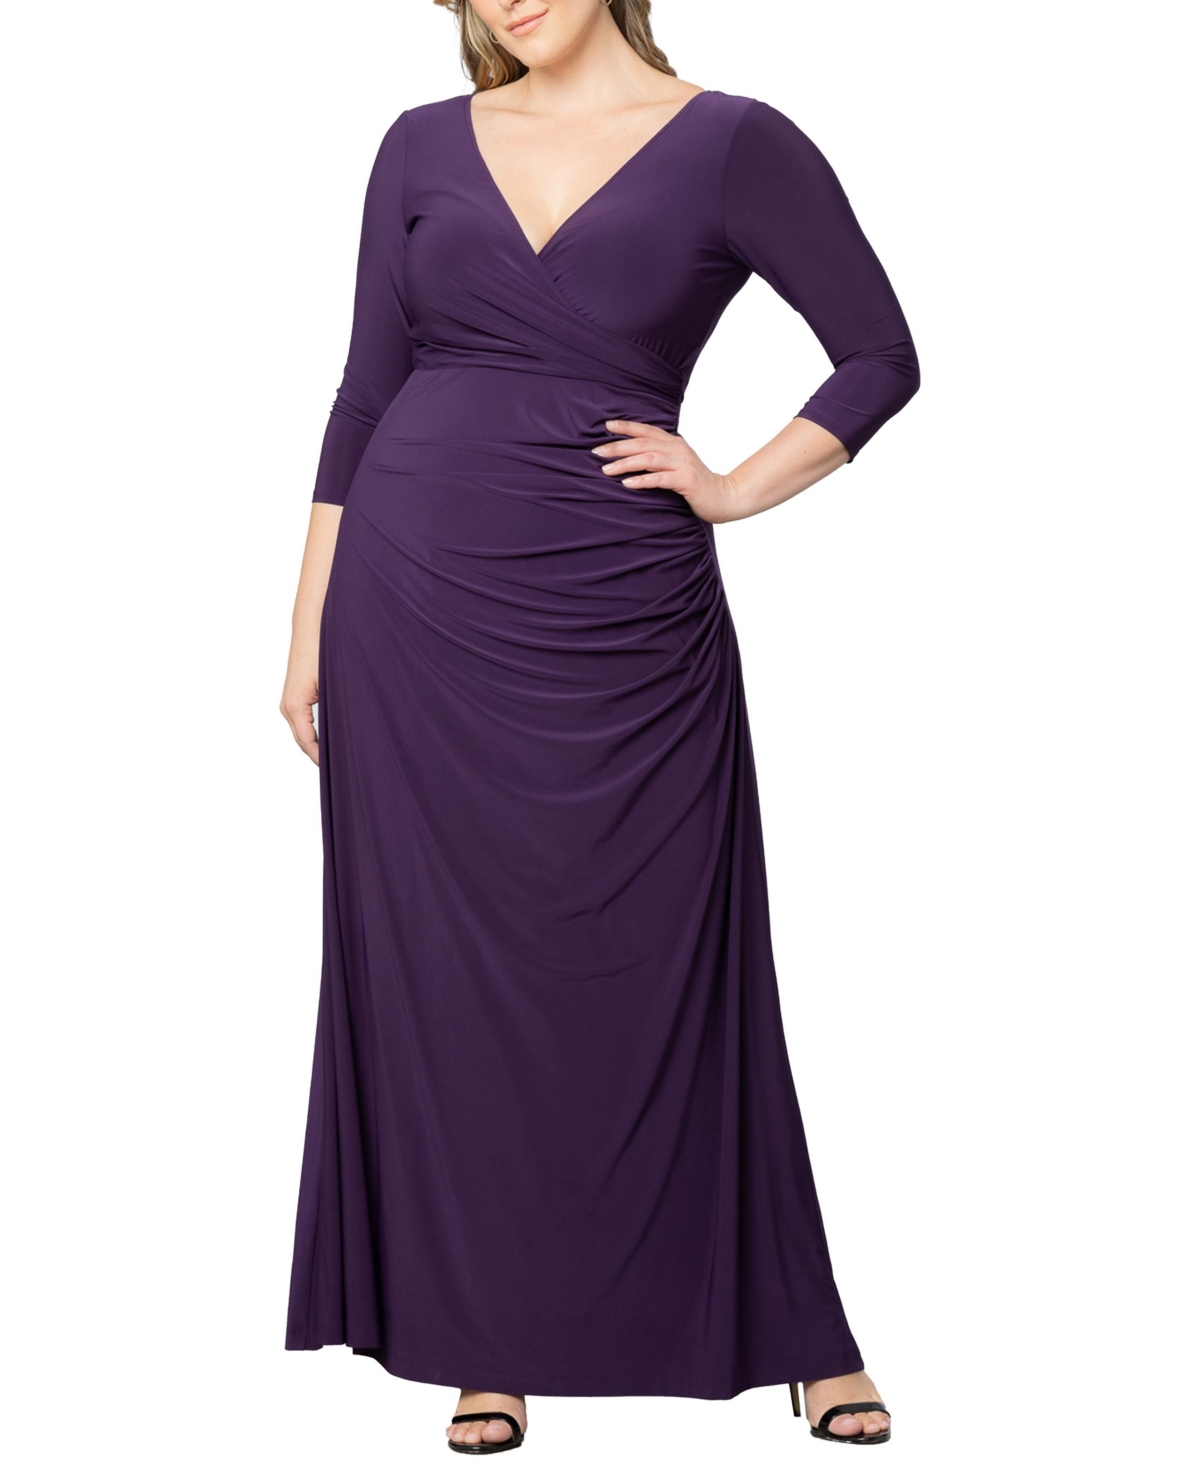 Plus Size Gala Glam V Neck Evening Gown - Imperial plum